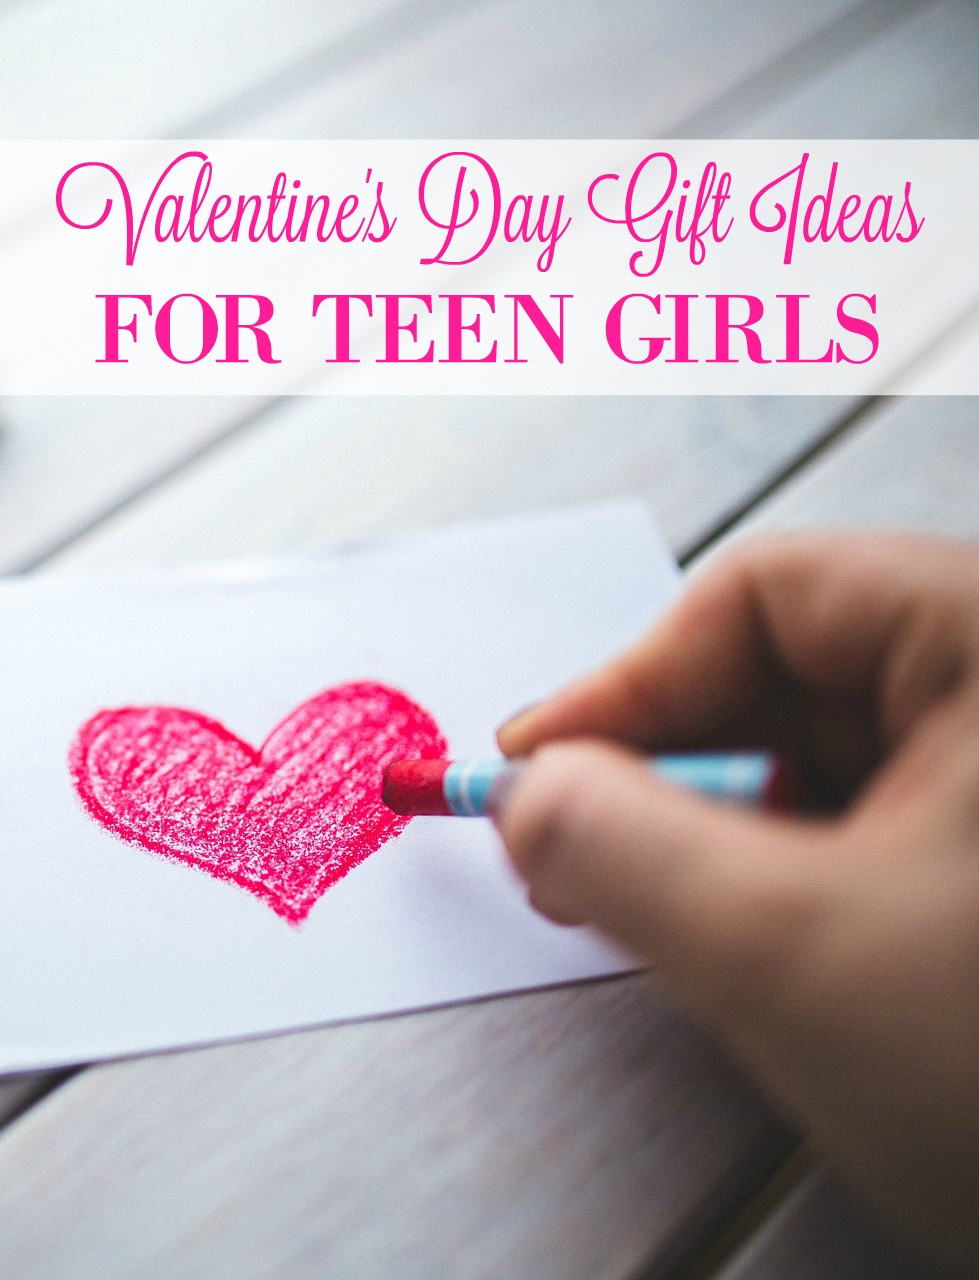 Valentines Gift Ideas For Daughter
 Valentine s Day Gift Ideas for Girls Beyond Chocolate And